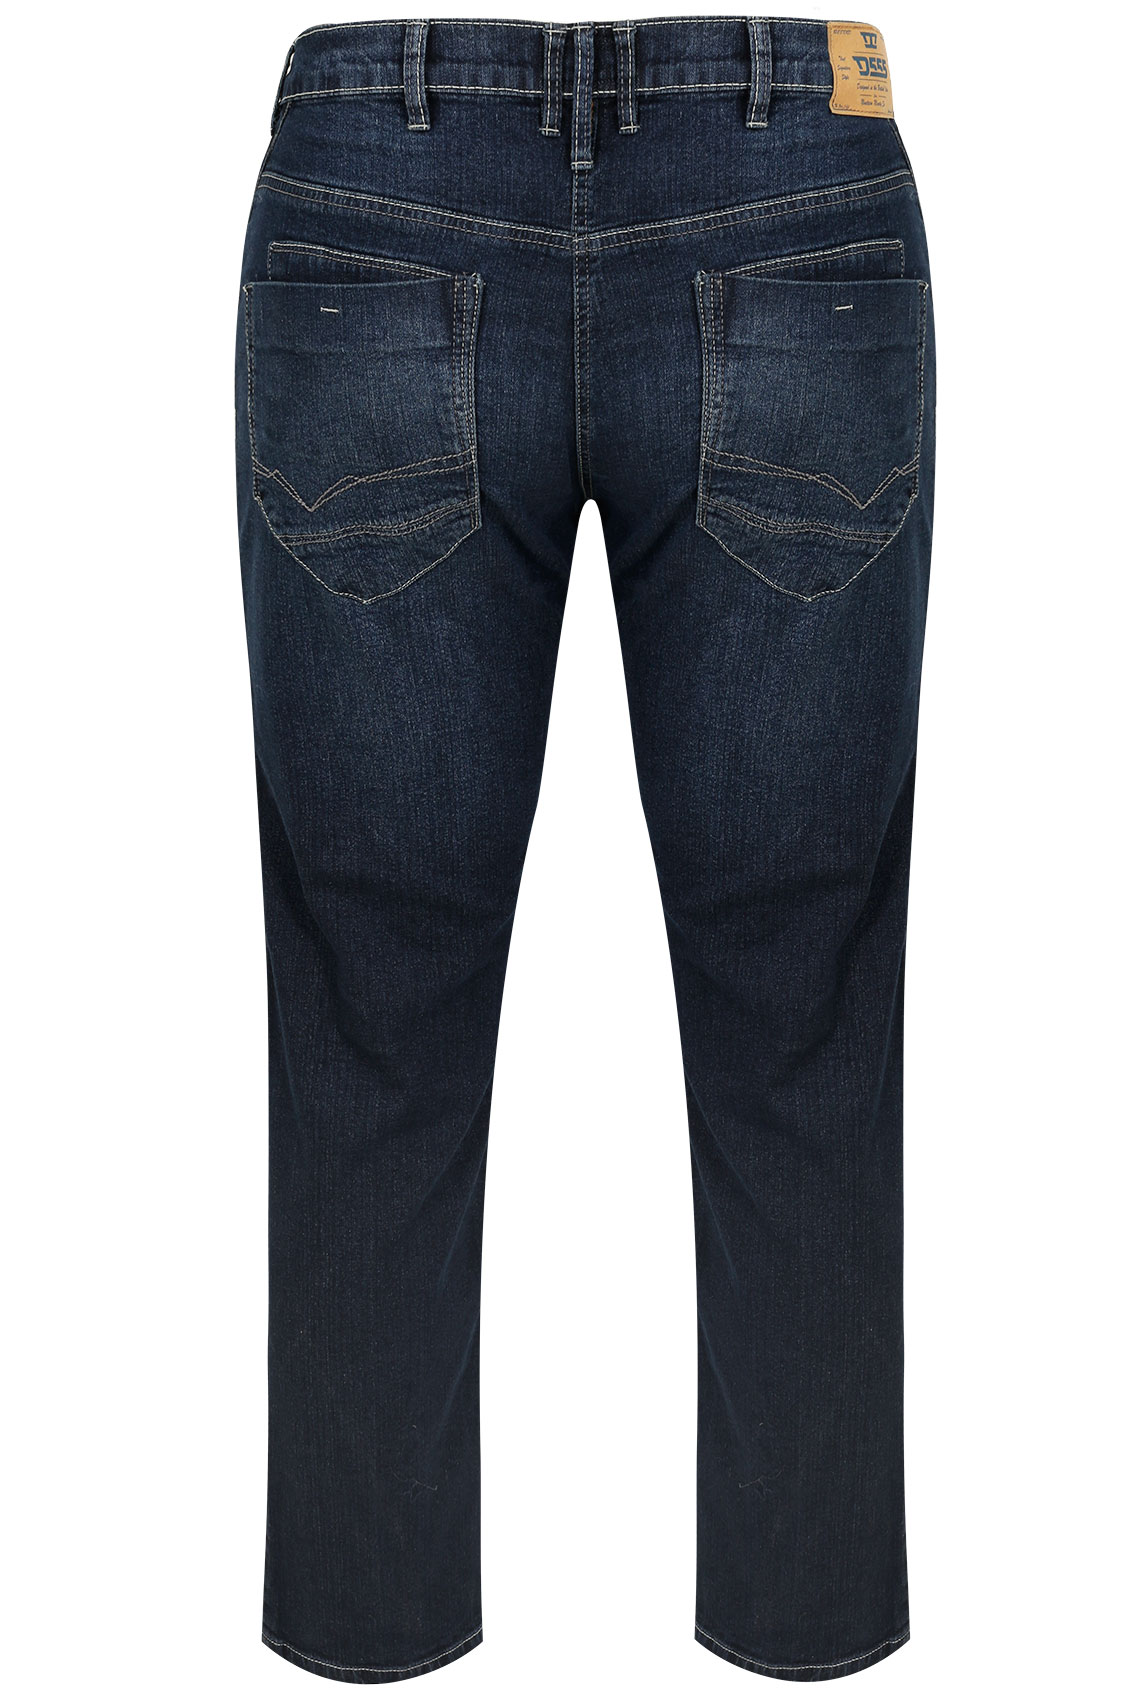 D555 Blue Tapered Leg Stretch Jeans